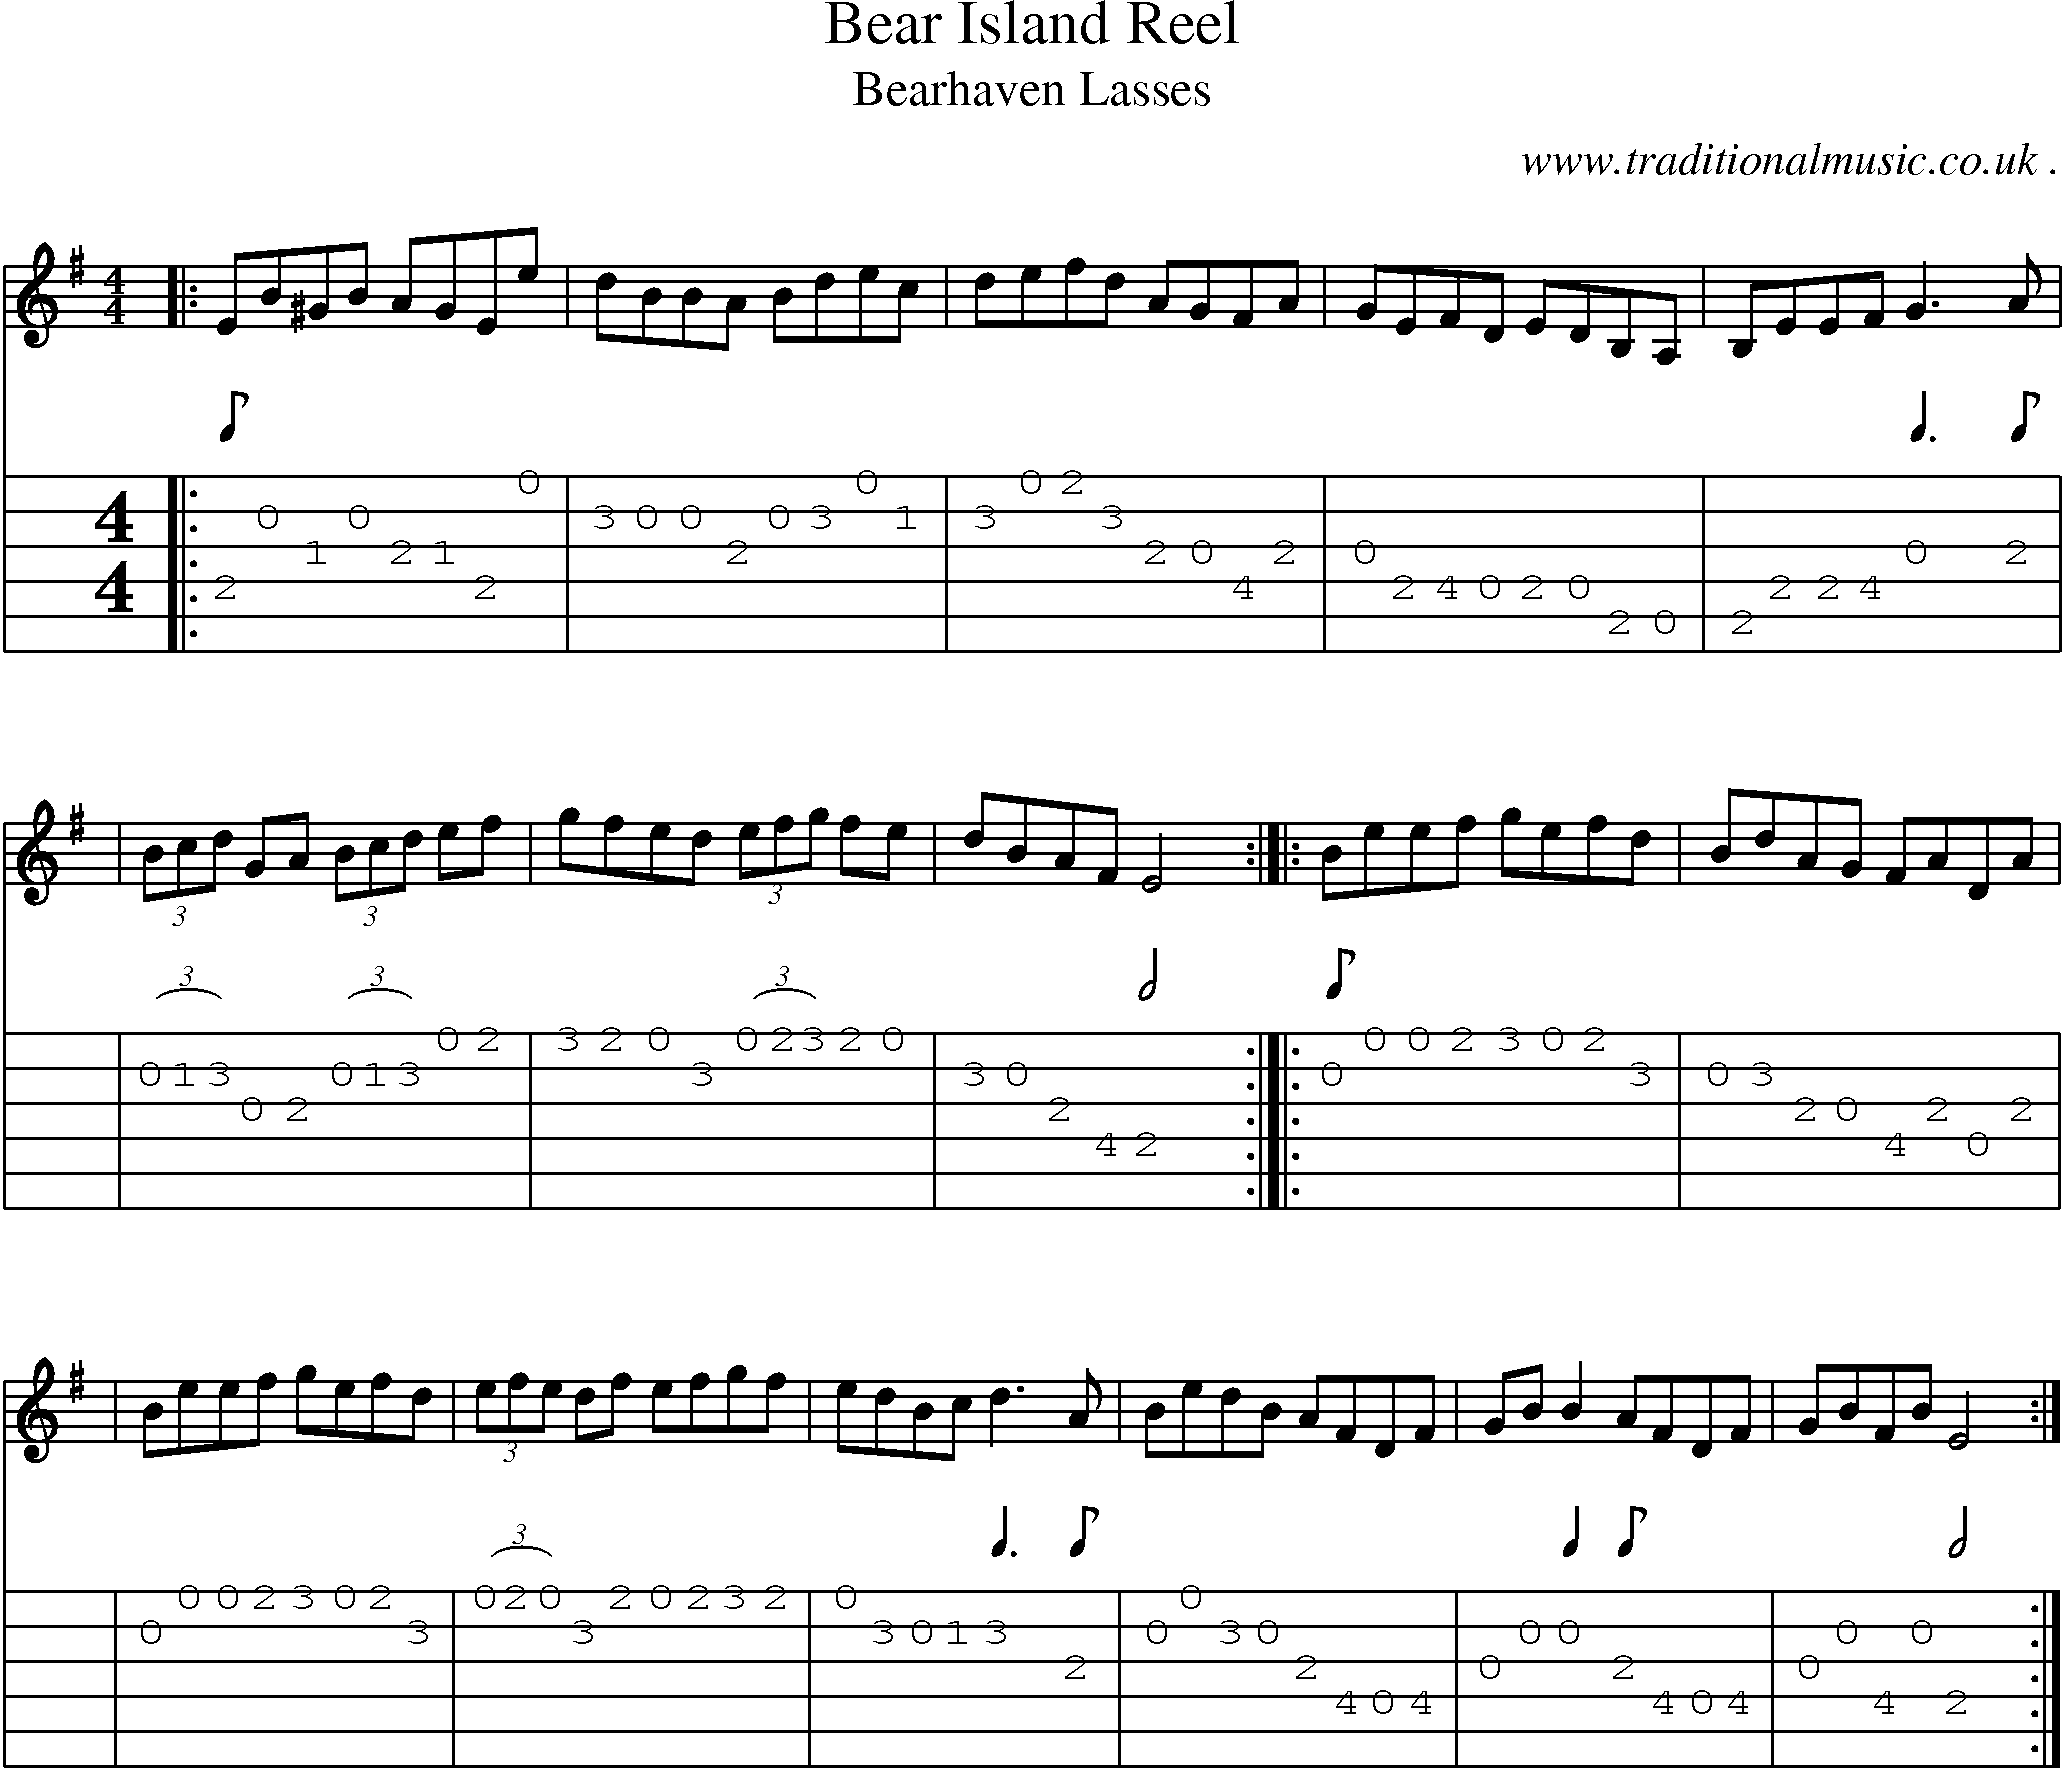 Sheet-music  score, Chords and Guitar Tabs for Bear Island Reel